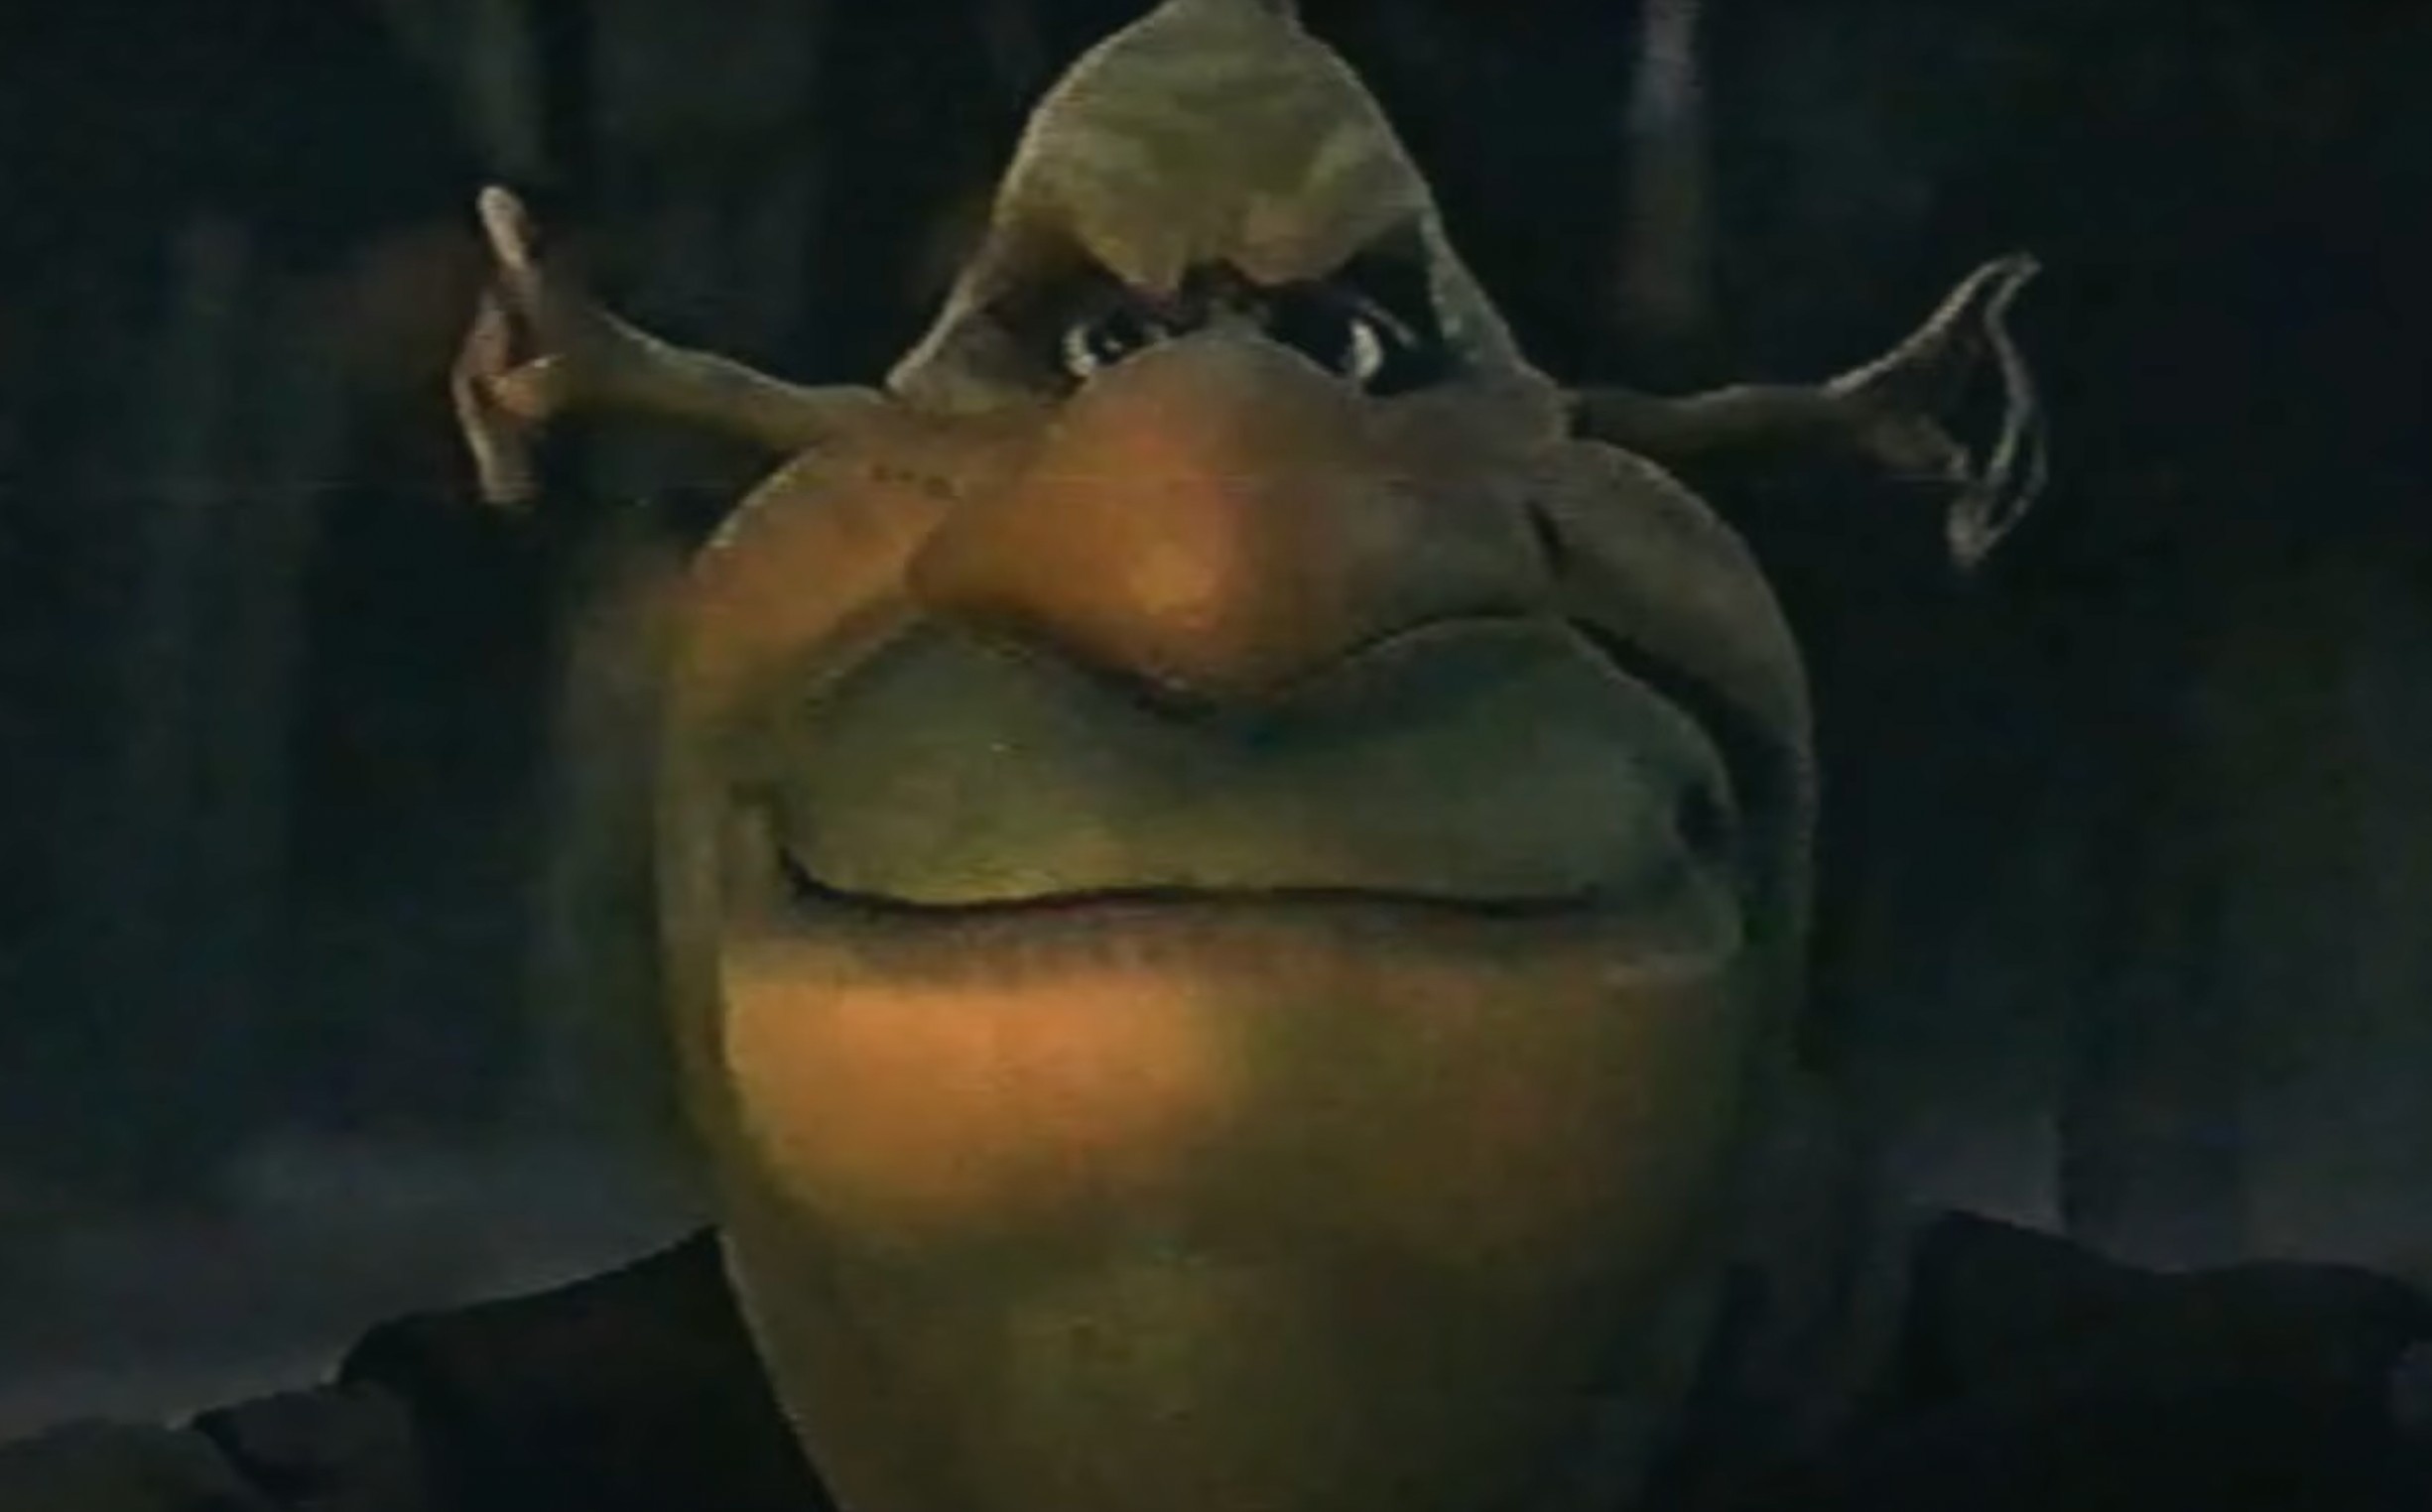 The Original 'Shrek' Test Footage from 1995 : r/movies